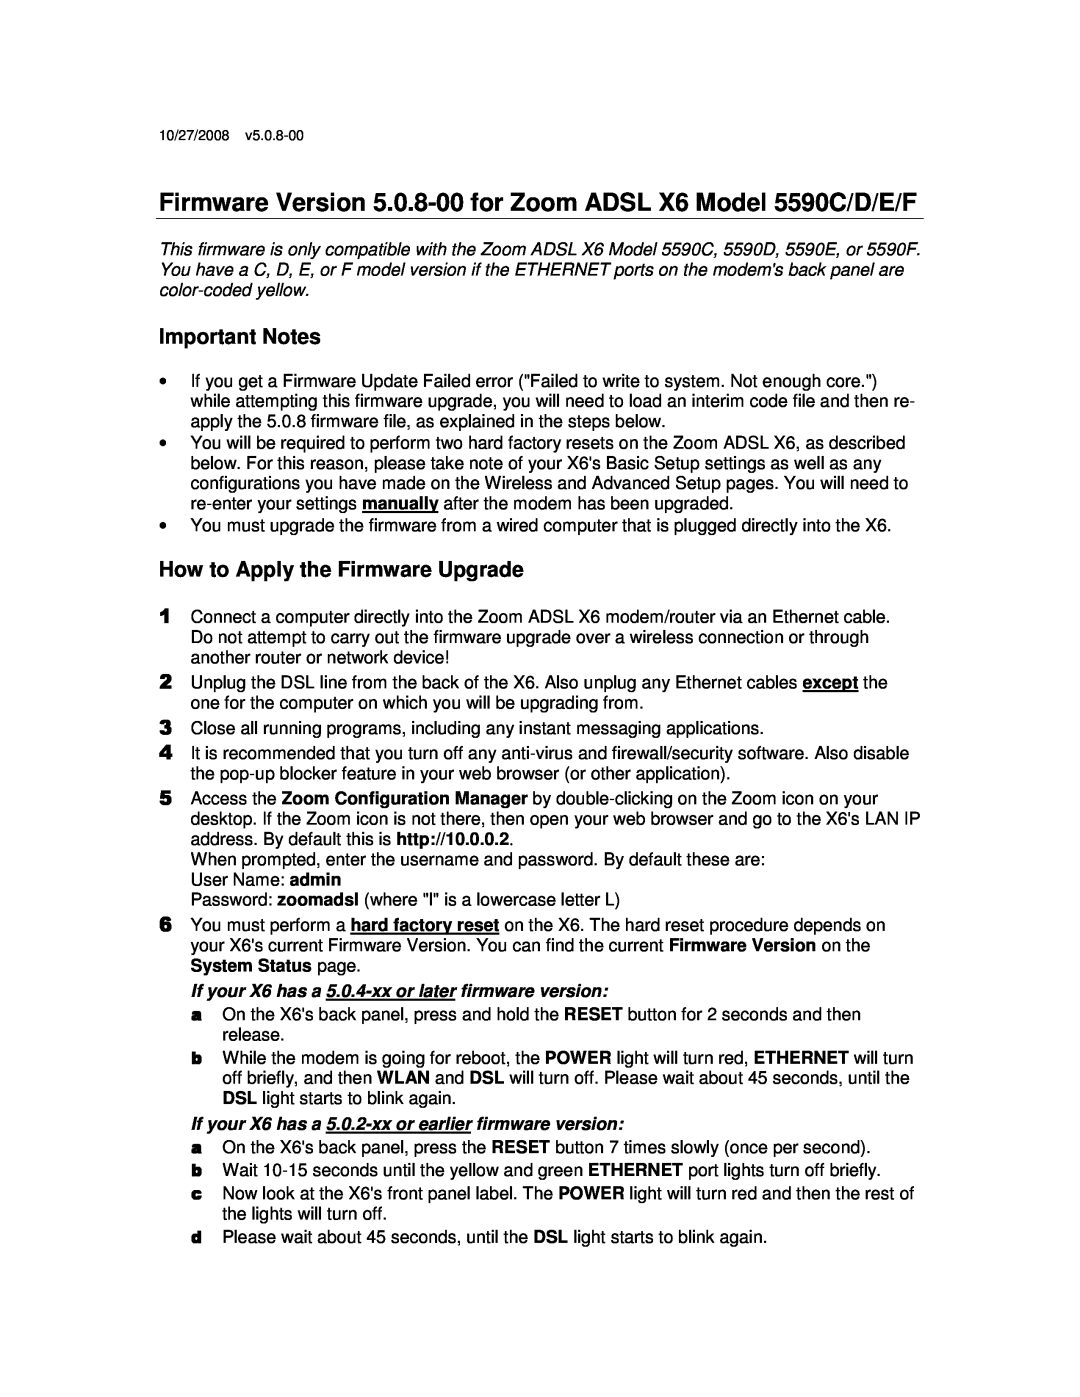 Zoom 5590C manual Important Notes, How to Apply the Firmware Upgrade, If your X6 has a 5.0.4-xx or later firmware version 